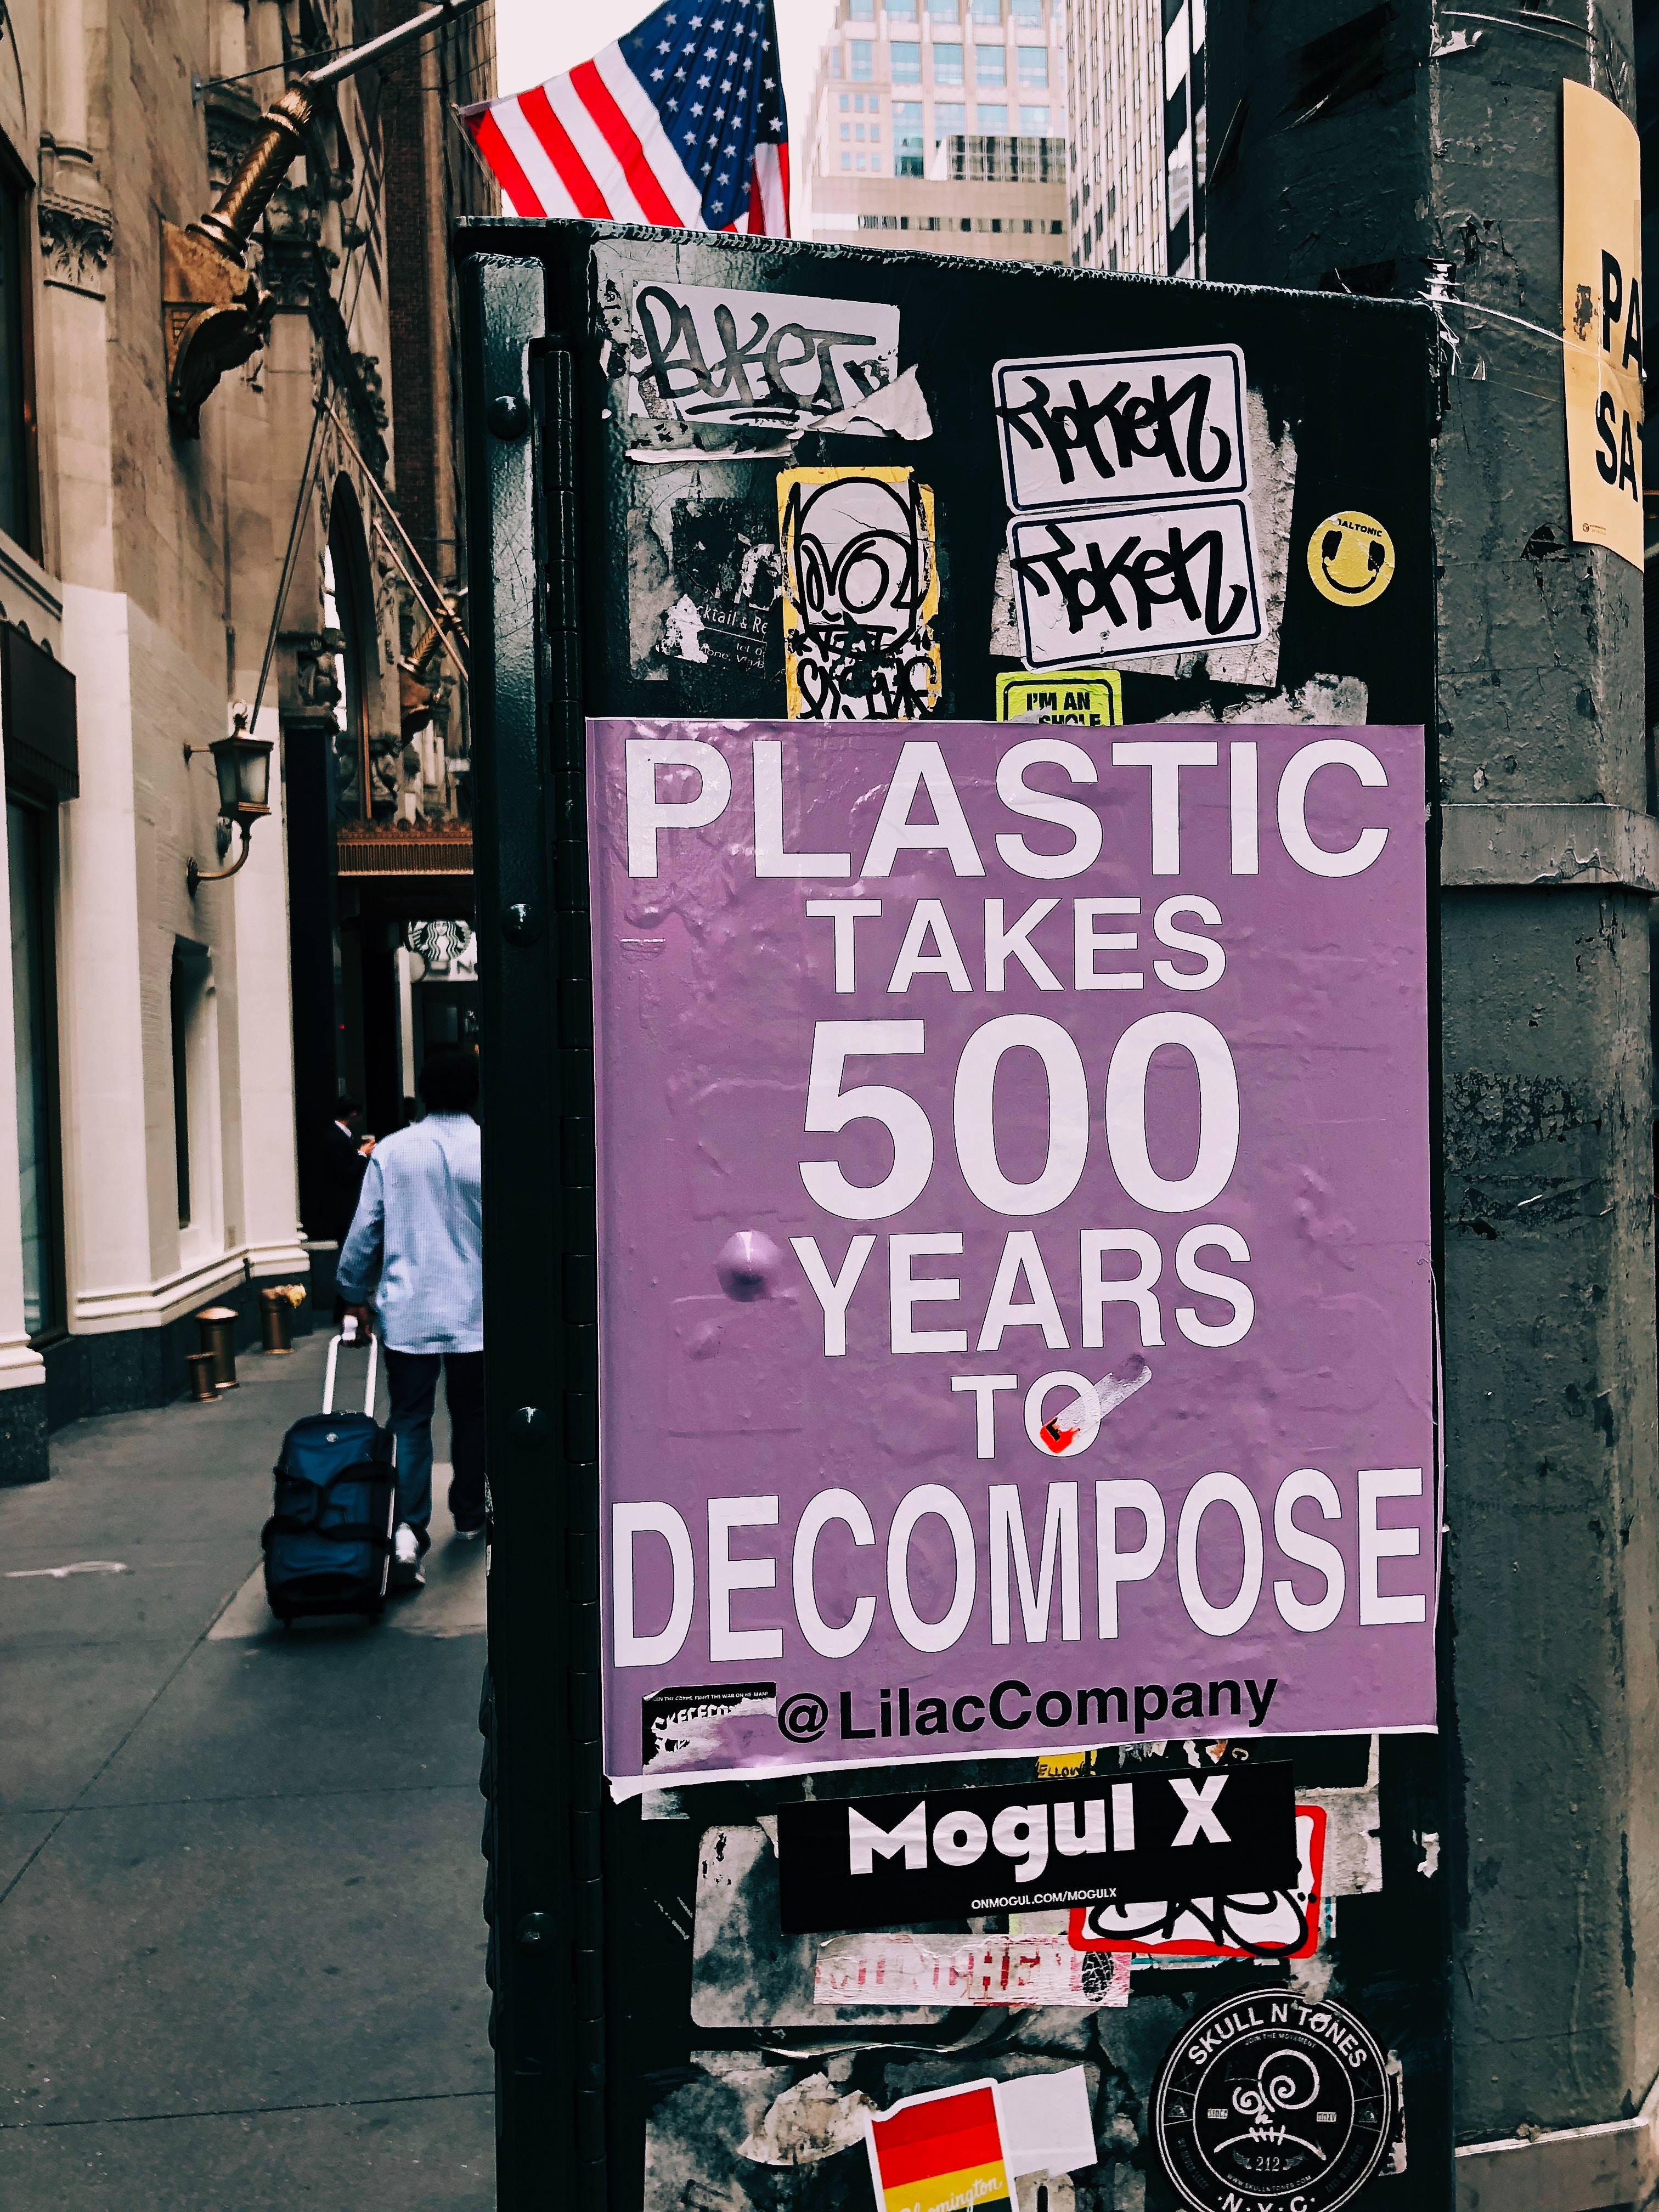 Plastic takes 500 years to decompose poster